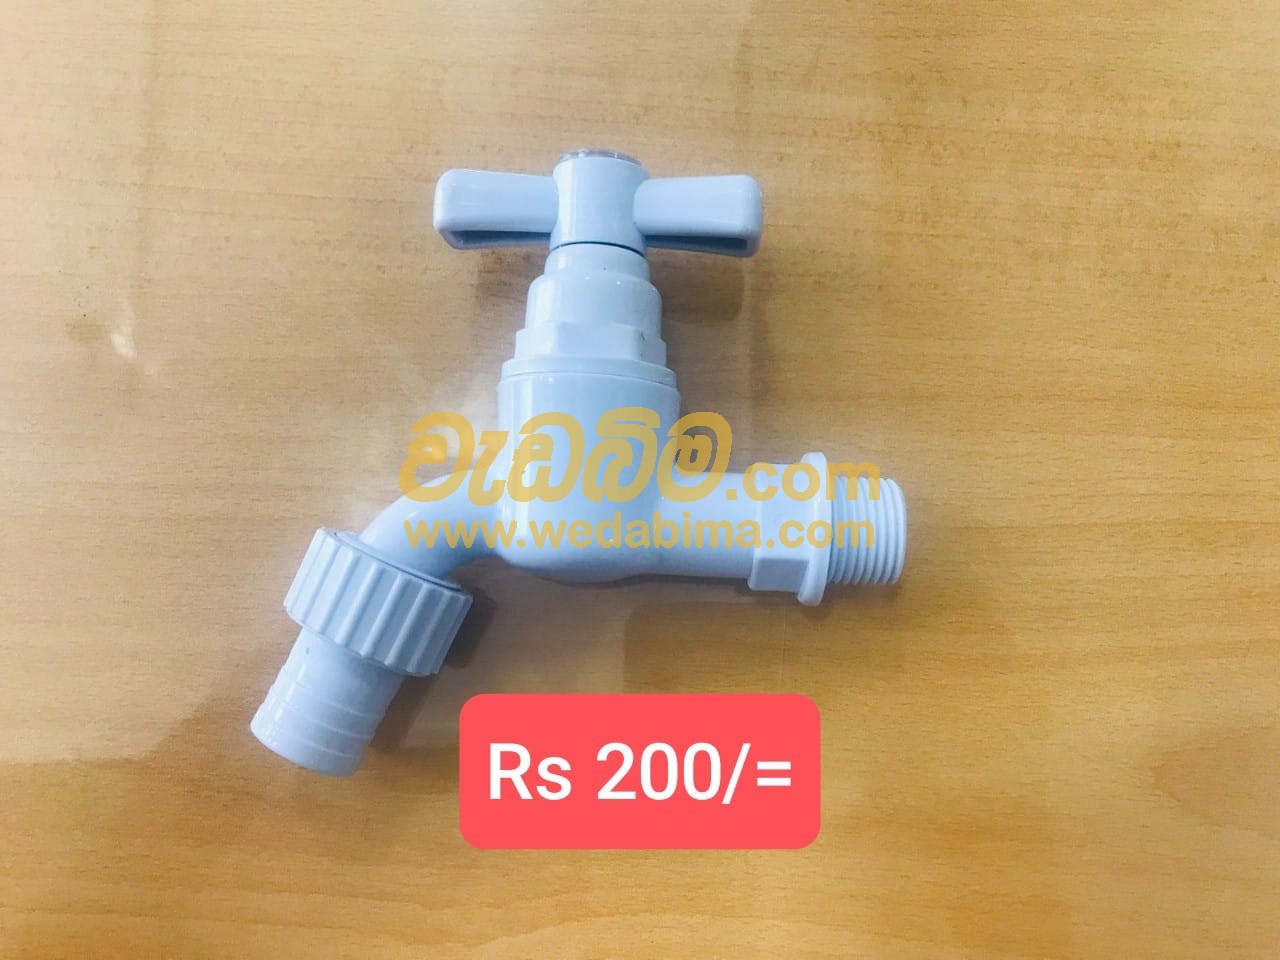 Garden Tap for sale price in colombo